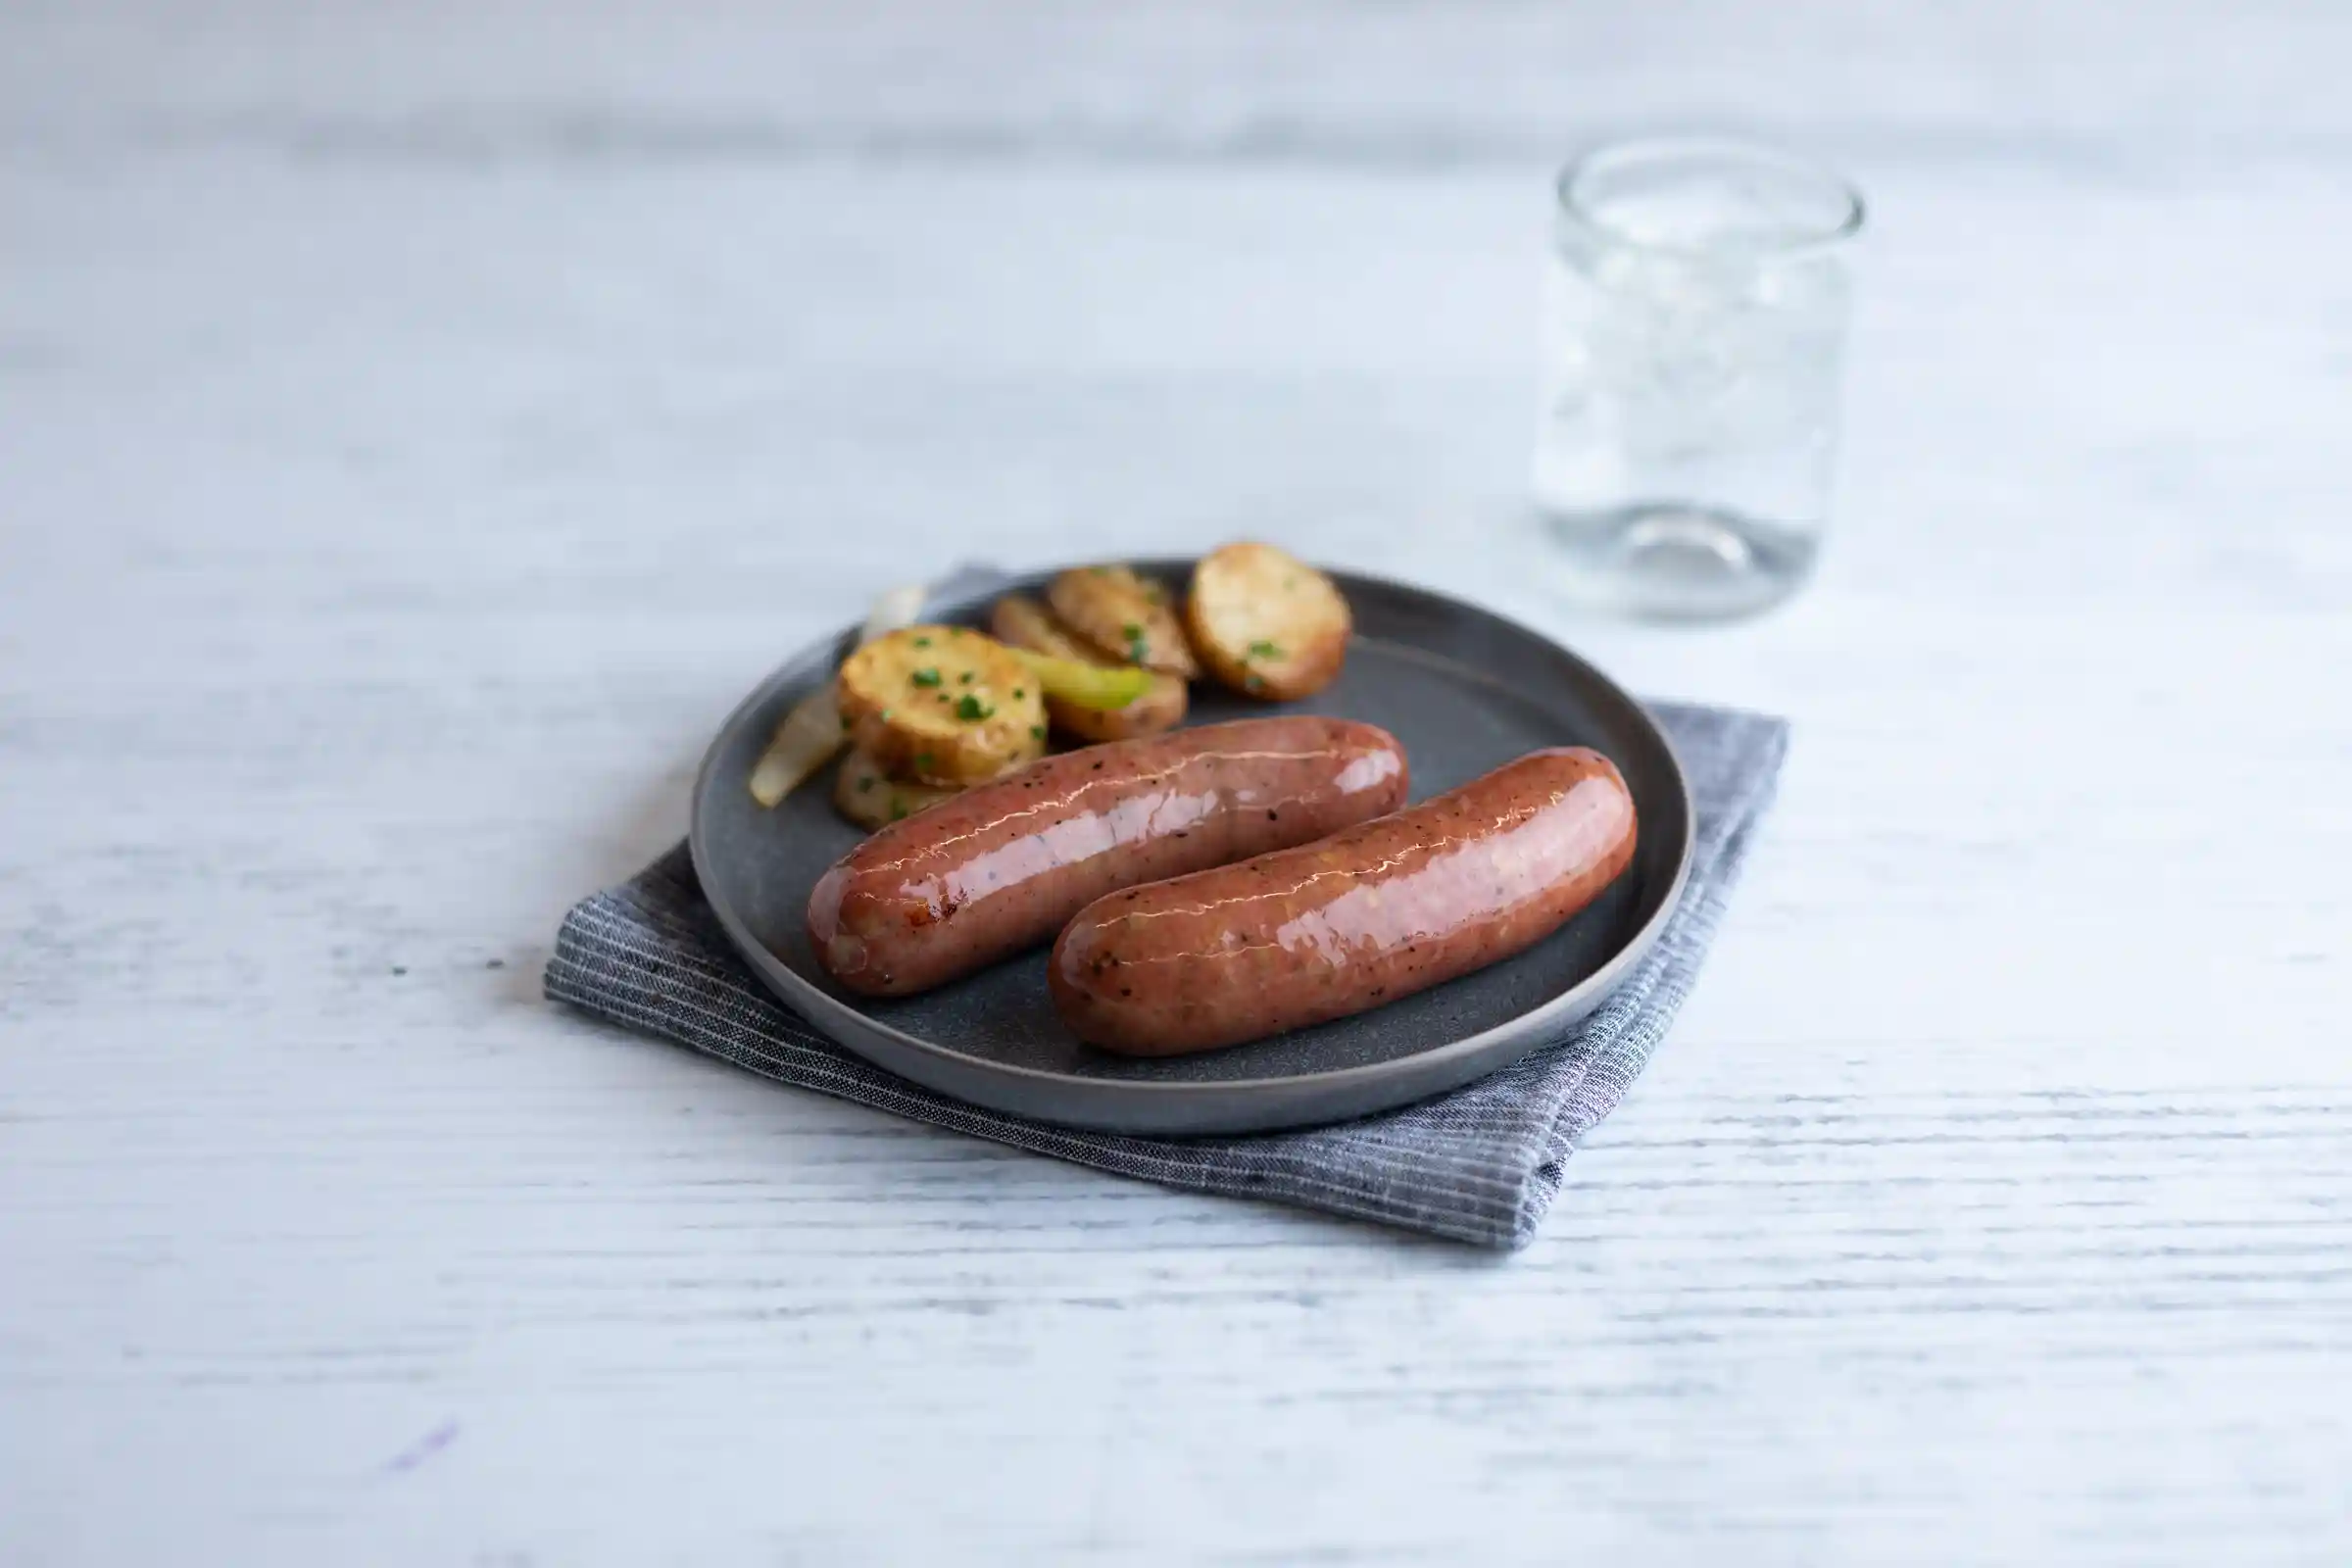 Aidells® Fully Cooked Smoked Chicken and Apple Chicken Sausage Links, 4 oz, 64 Links per Case, 16 Lbs, Frozenhttps://images.salsify.com/image/upload/s--0NnwsOVC--/q_25/mhhns6cbidfjiyfveosd.webp